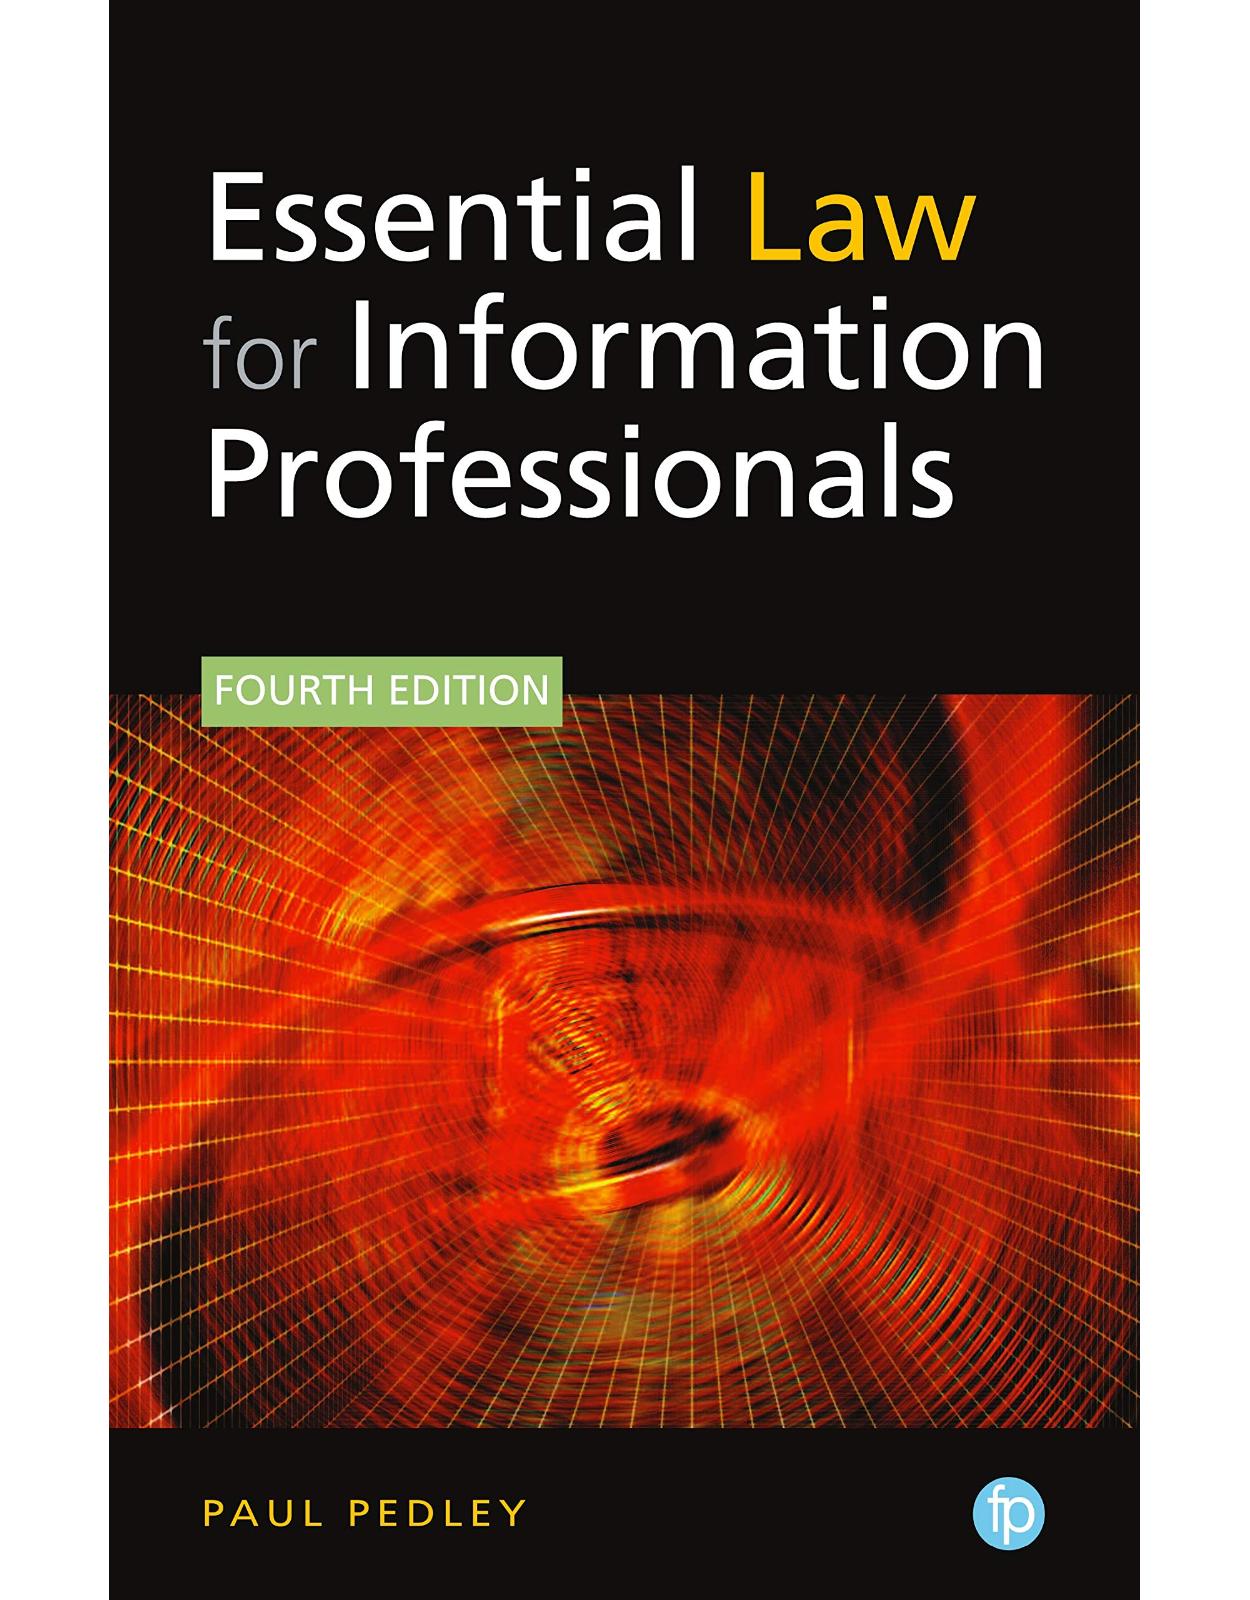 Essential Law for Information Professionals, 4th edition